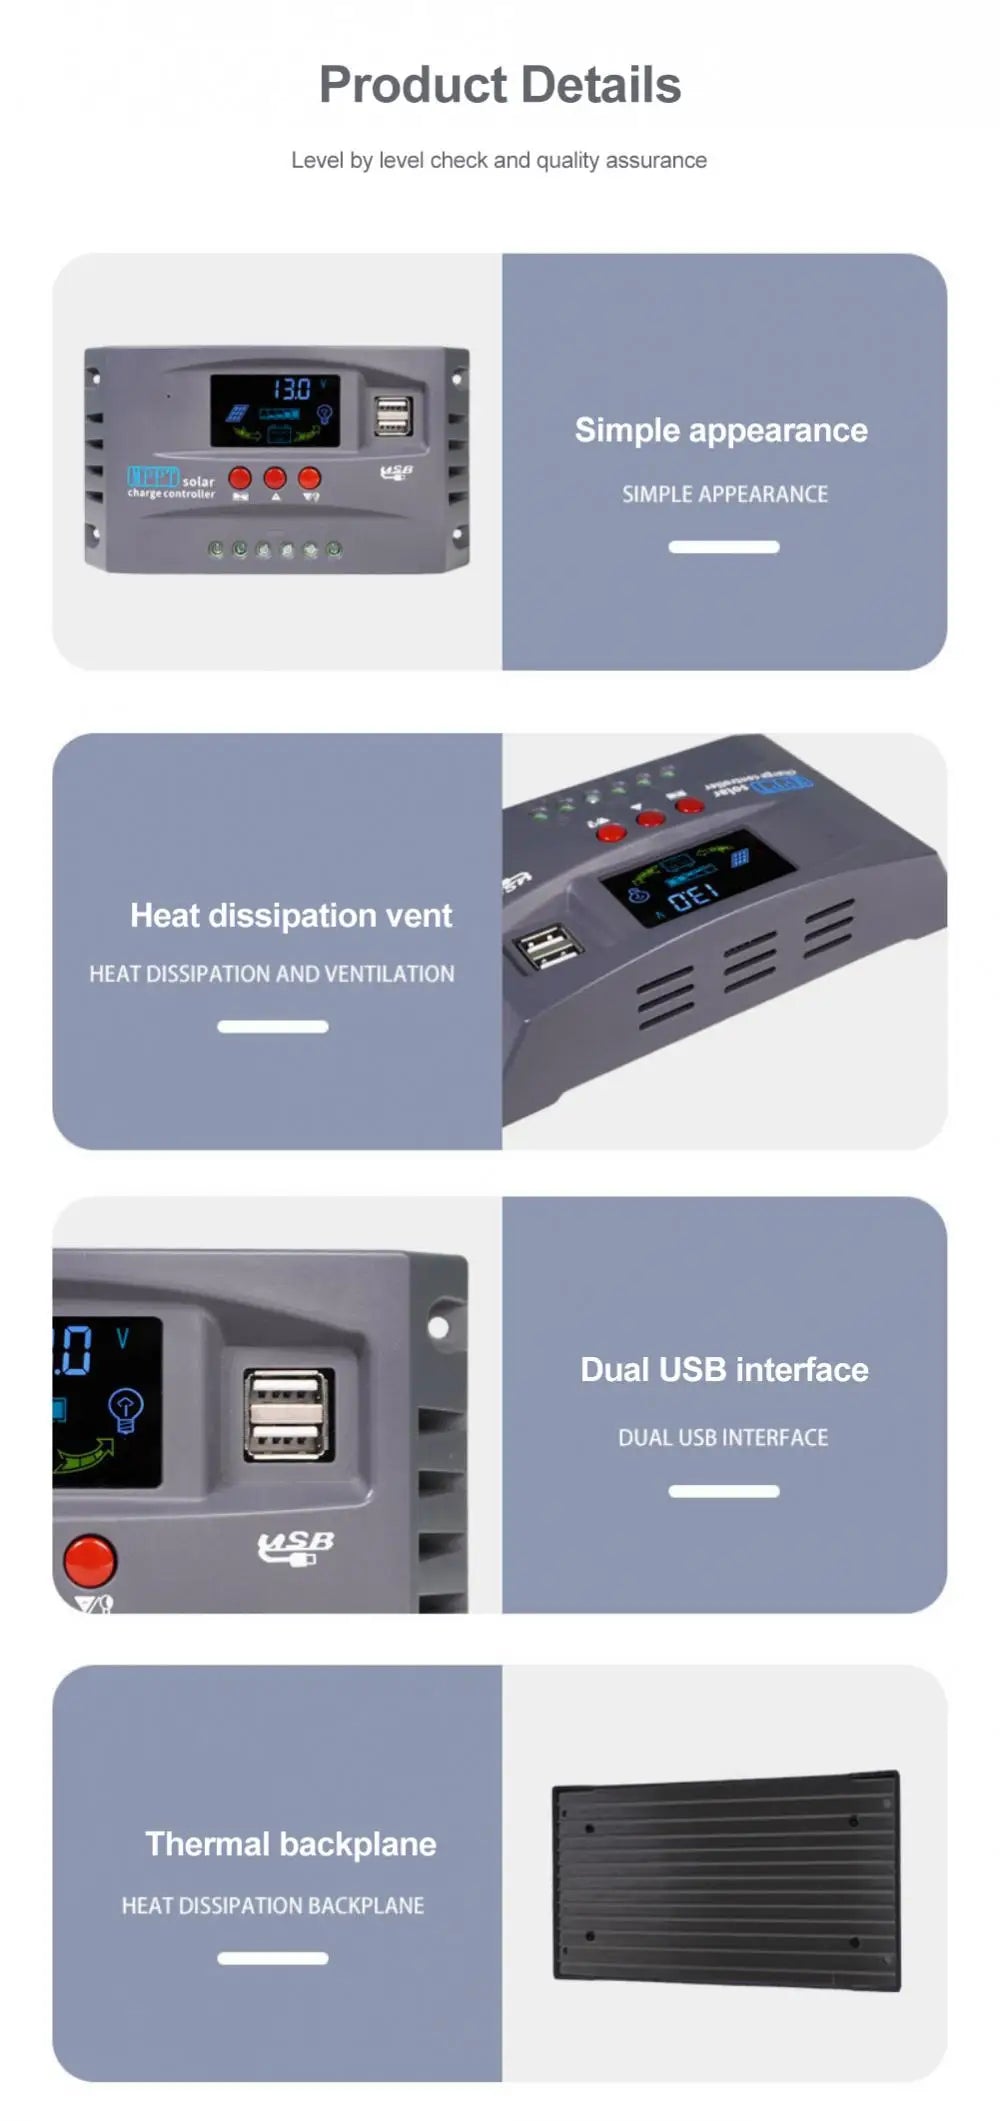 CORUI 10A 20A 30A MPPT Solar Charge Controller, High-quality product with level-checked features, simple design, and advanced cooling and connectivity.